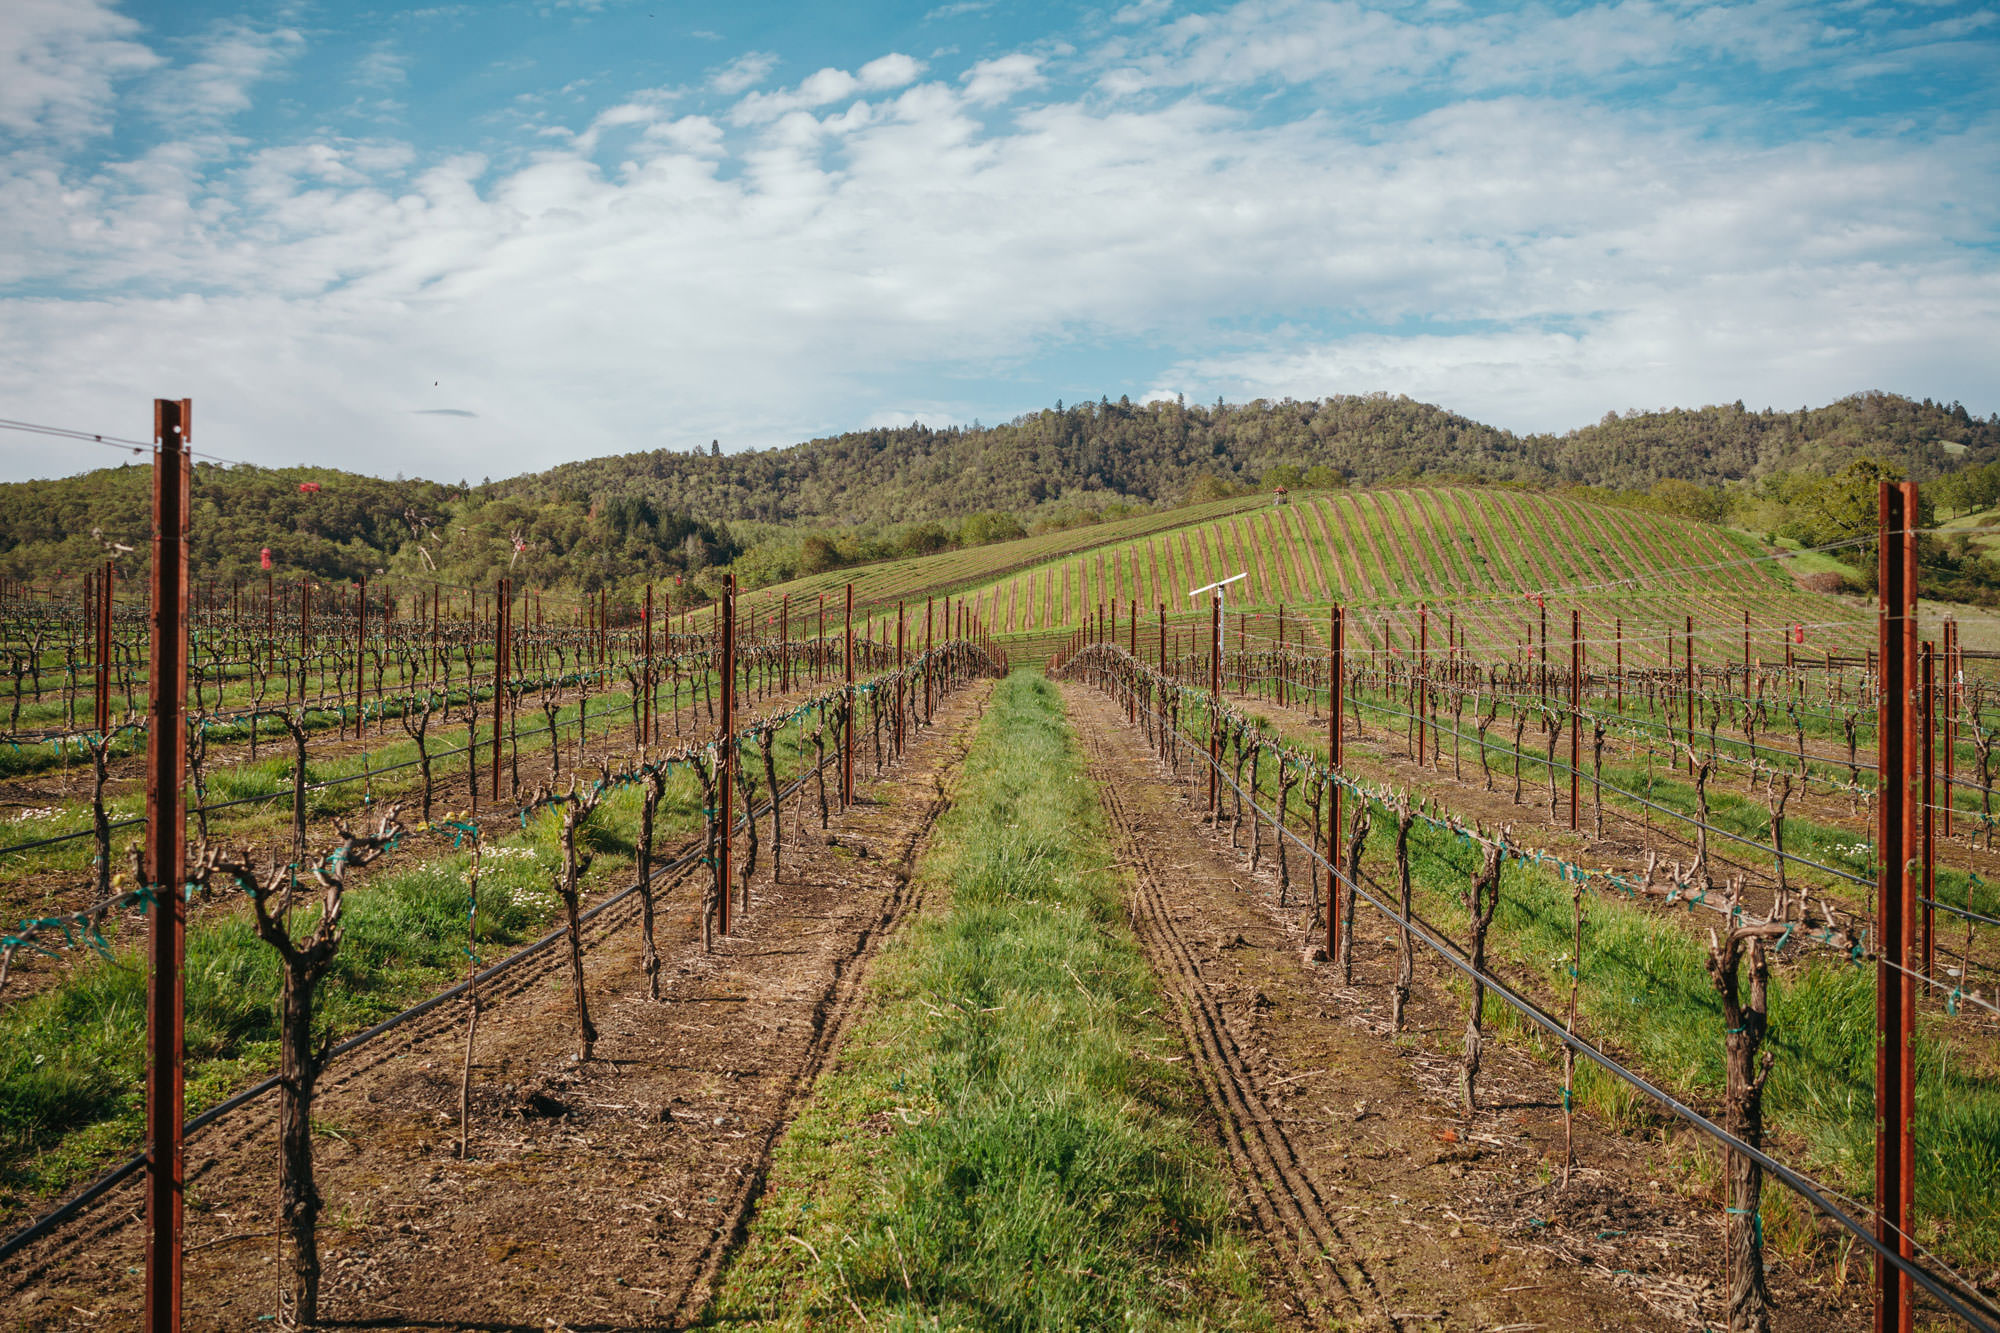 The grapes are growing at Abacela winery in Roseburg, and the rolling hills are beautiful.